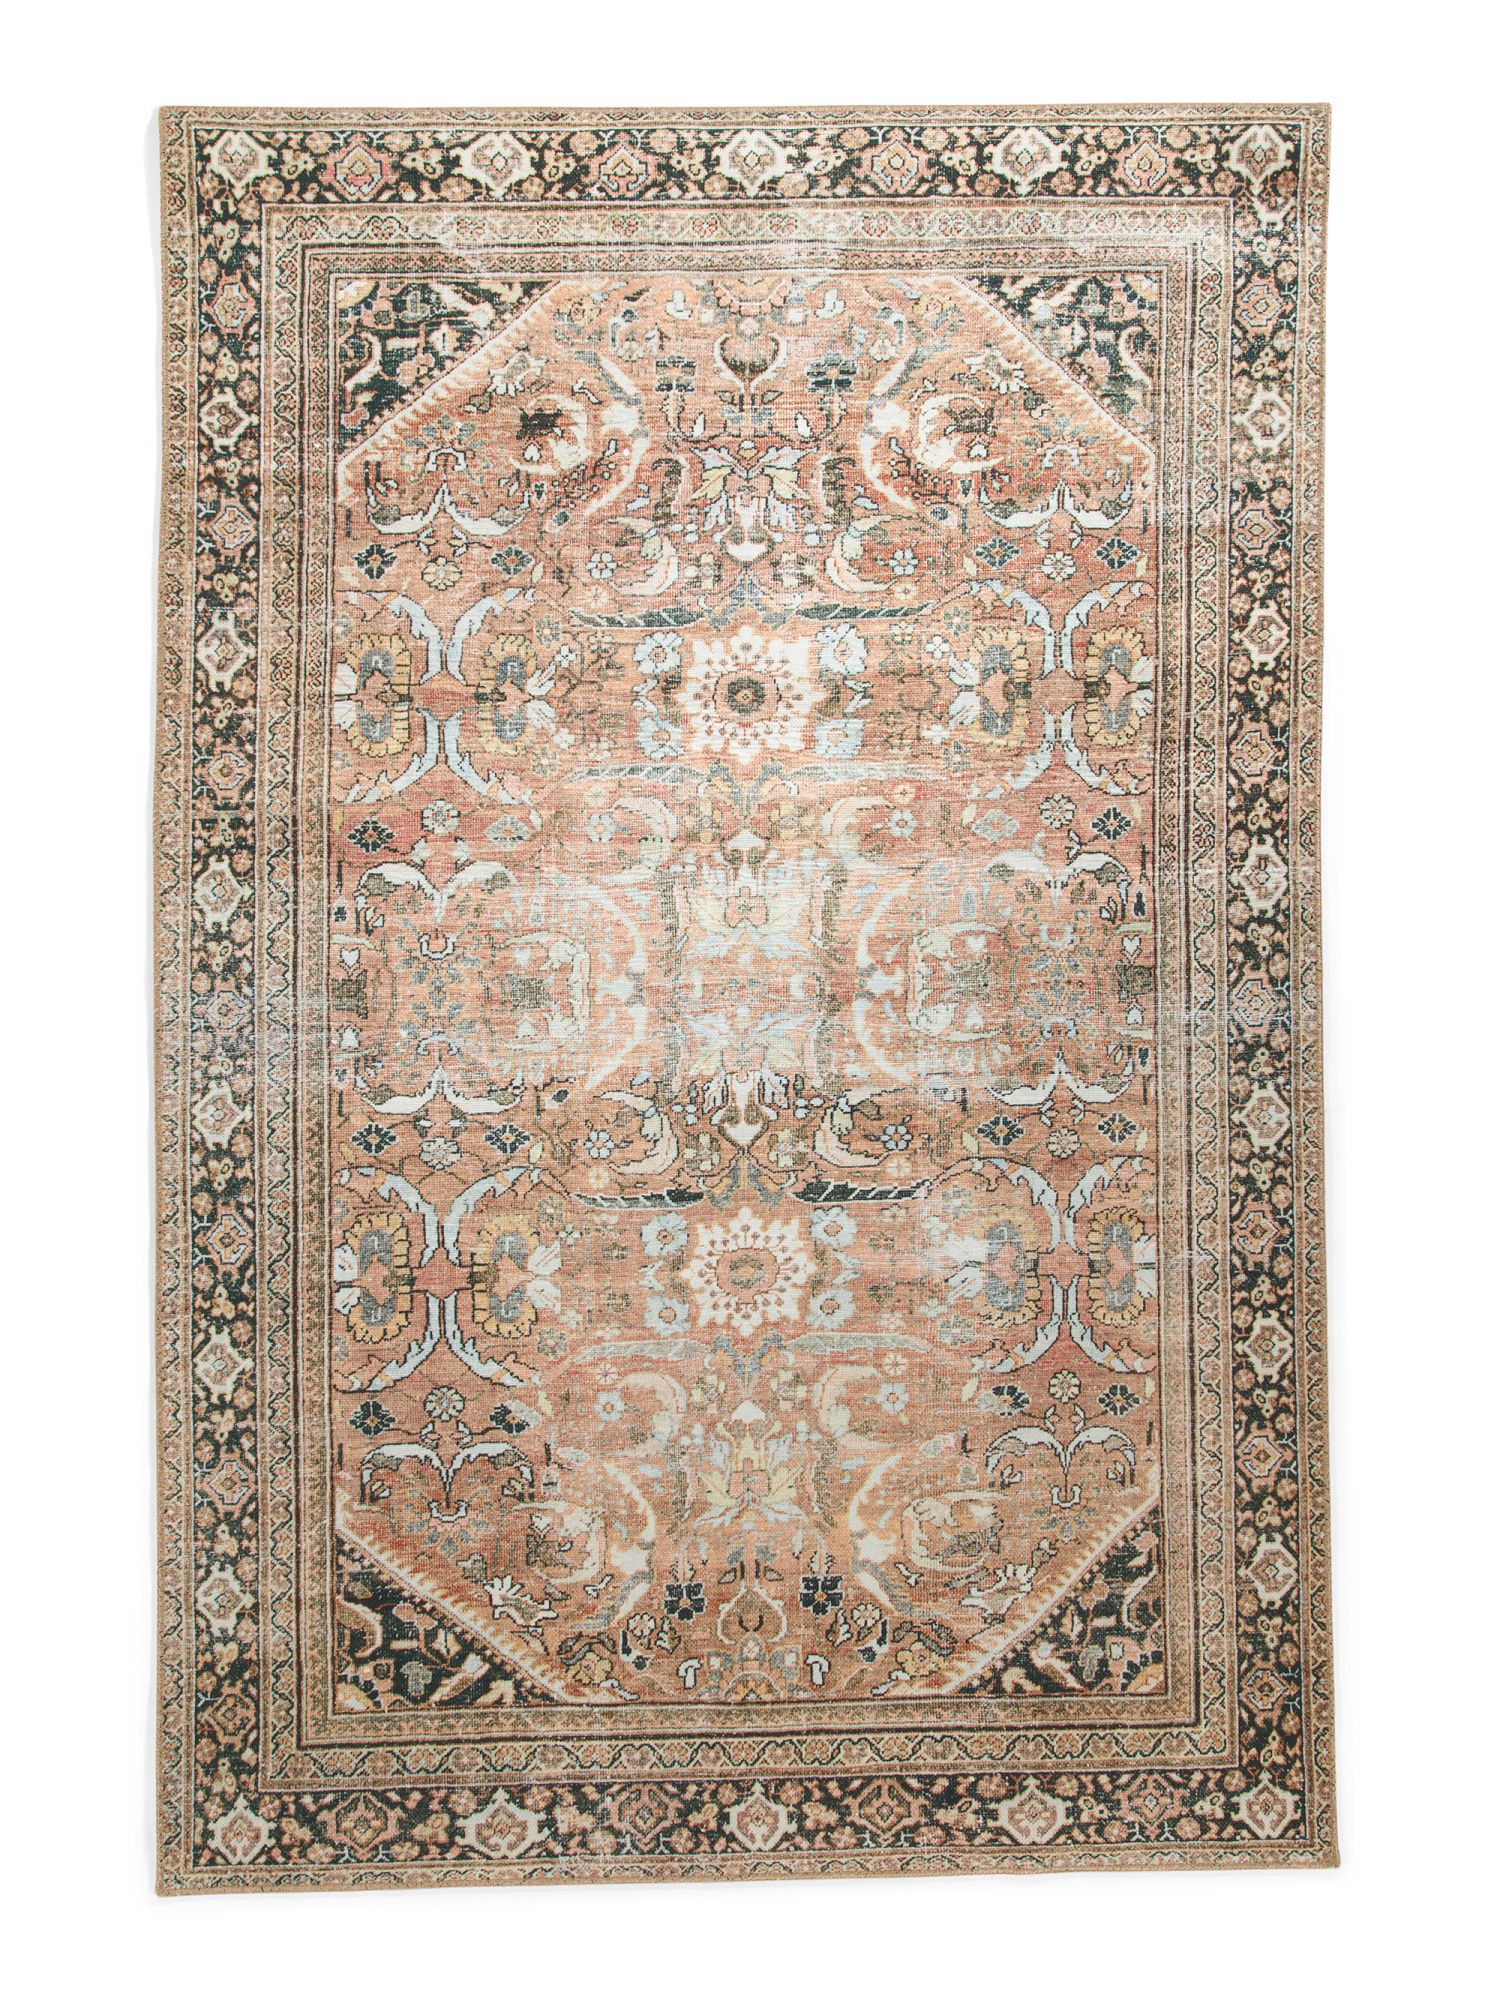 Made In Egypt 5x7 Transitional Flatweave Area Rug | TJ Maxx